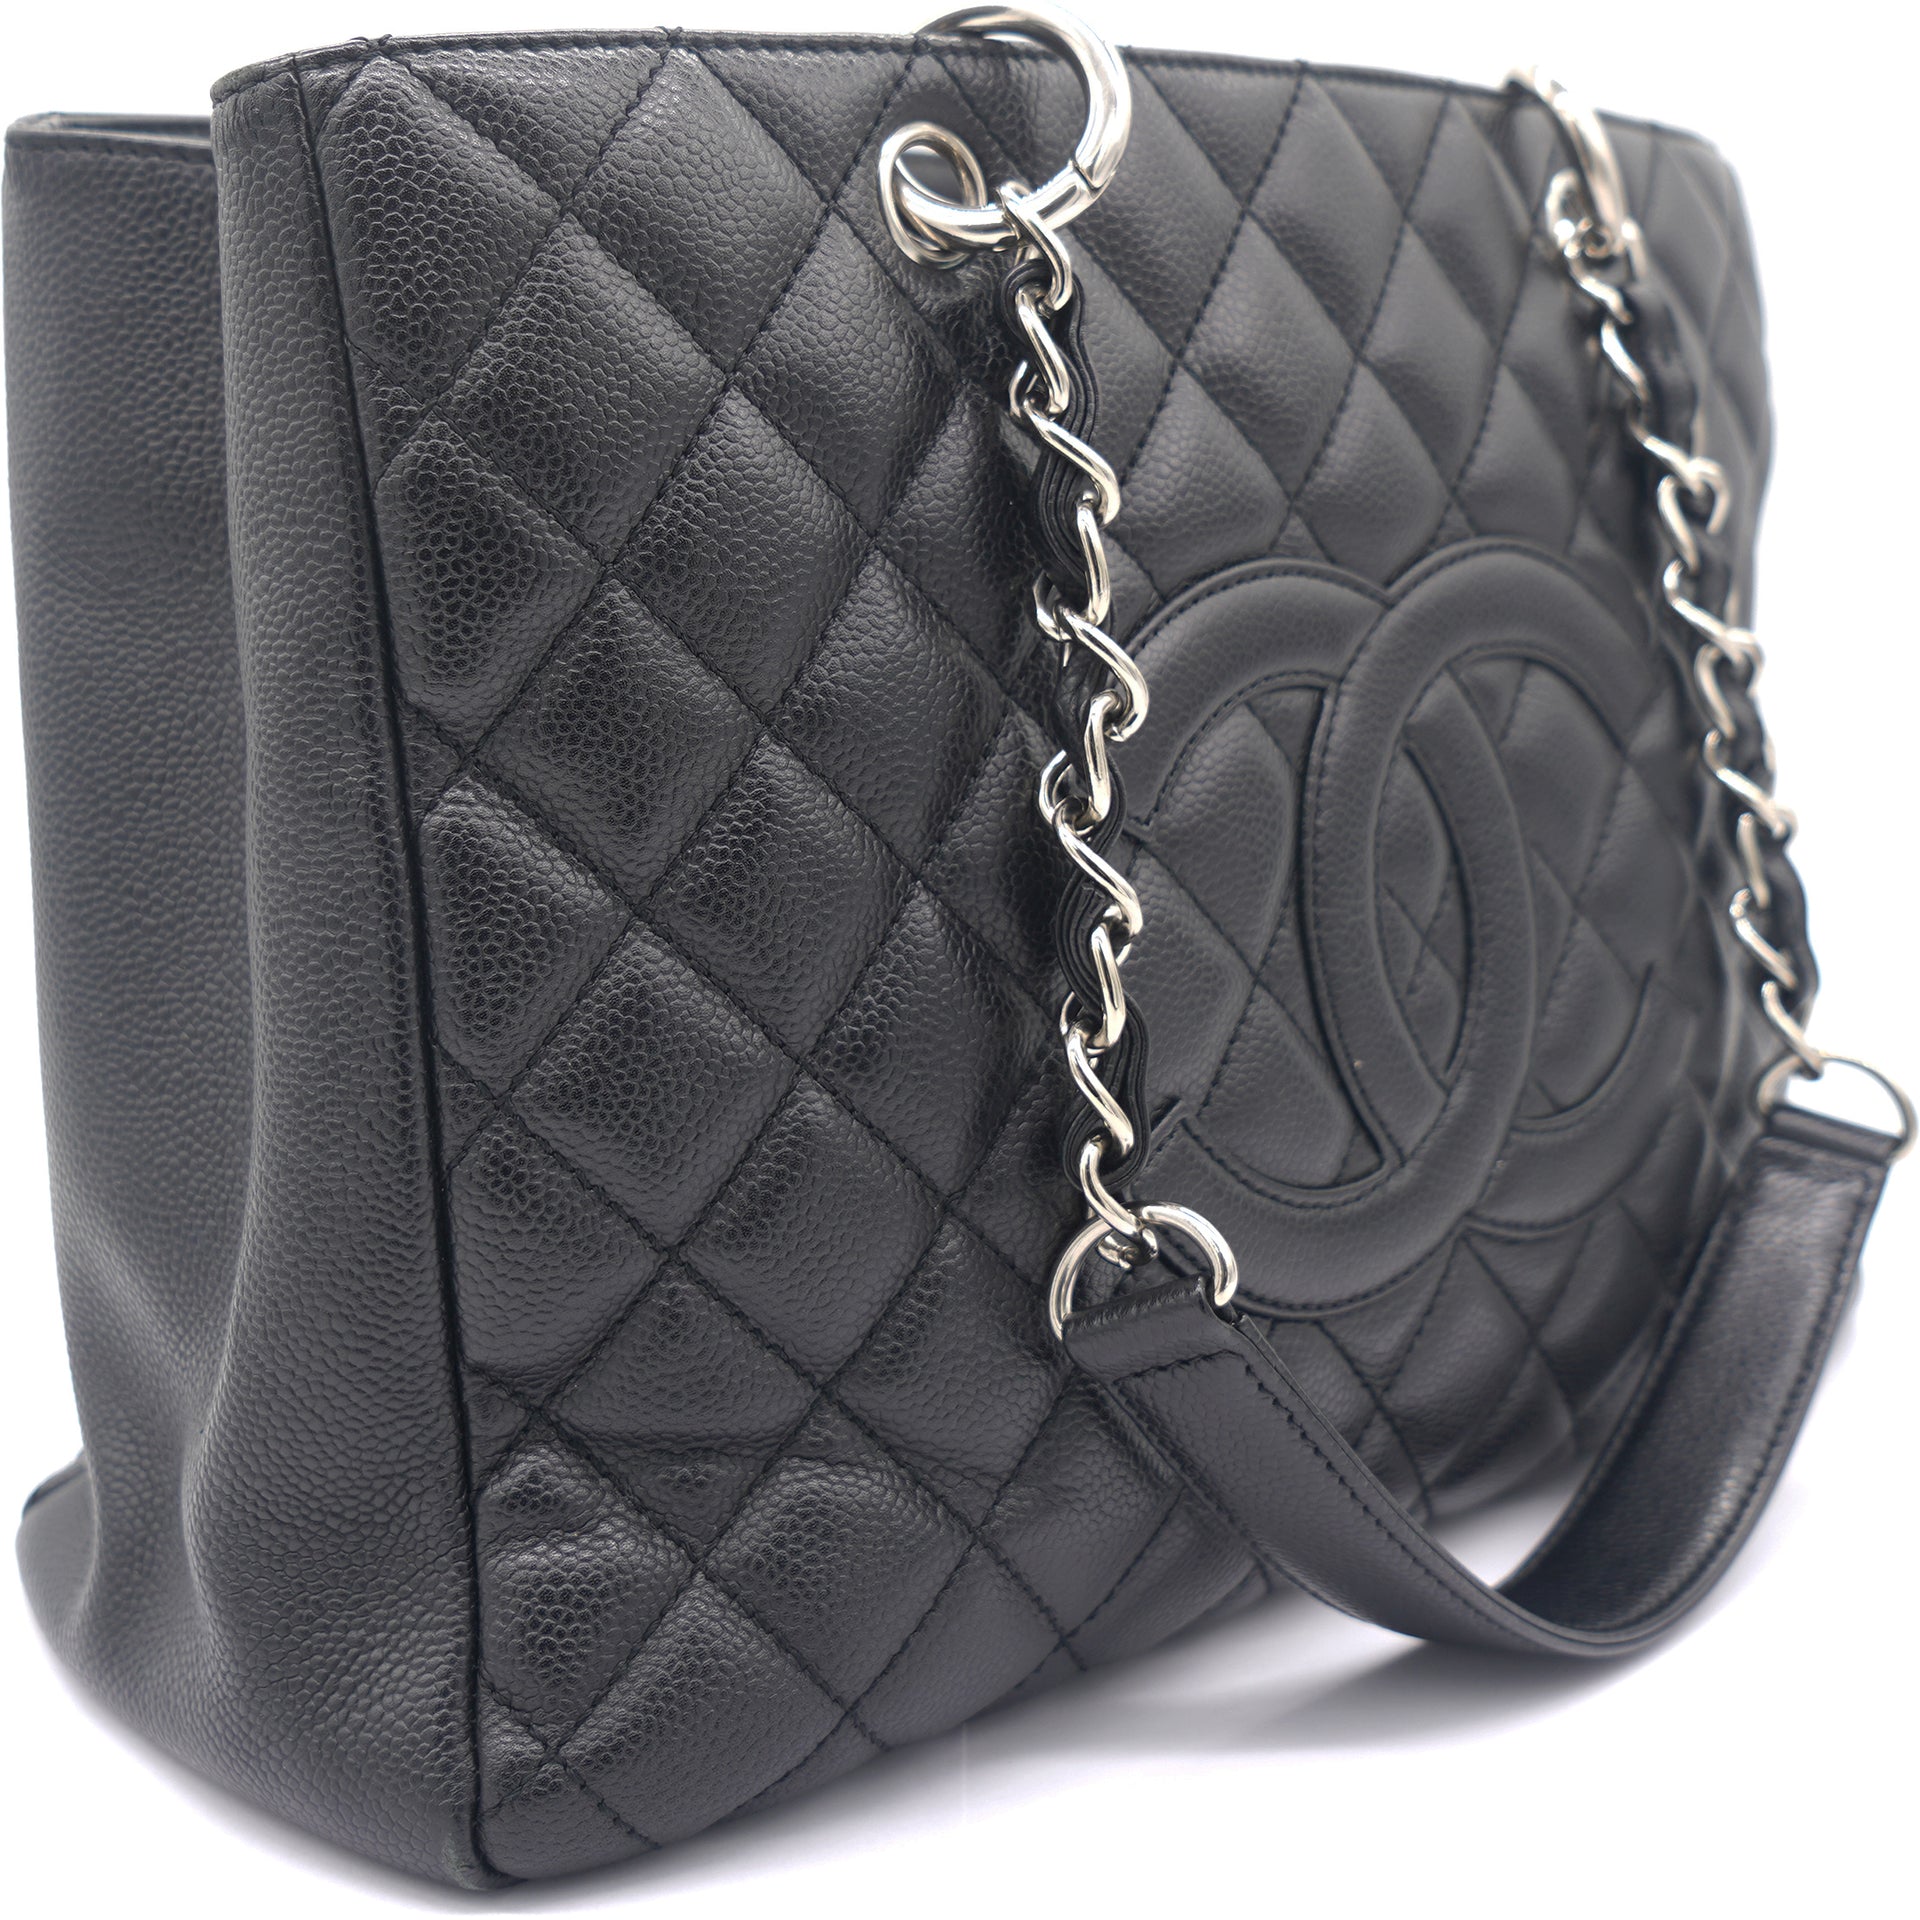 Chanel Black Quilted Caviar Leather Grand GST Shopper Tote Bag – STYLISHTOP